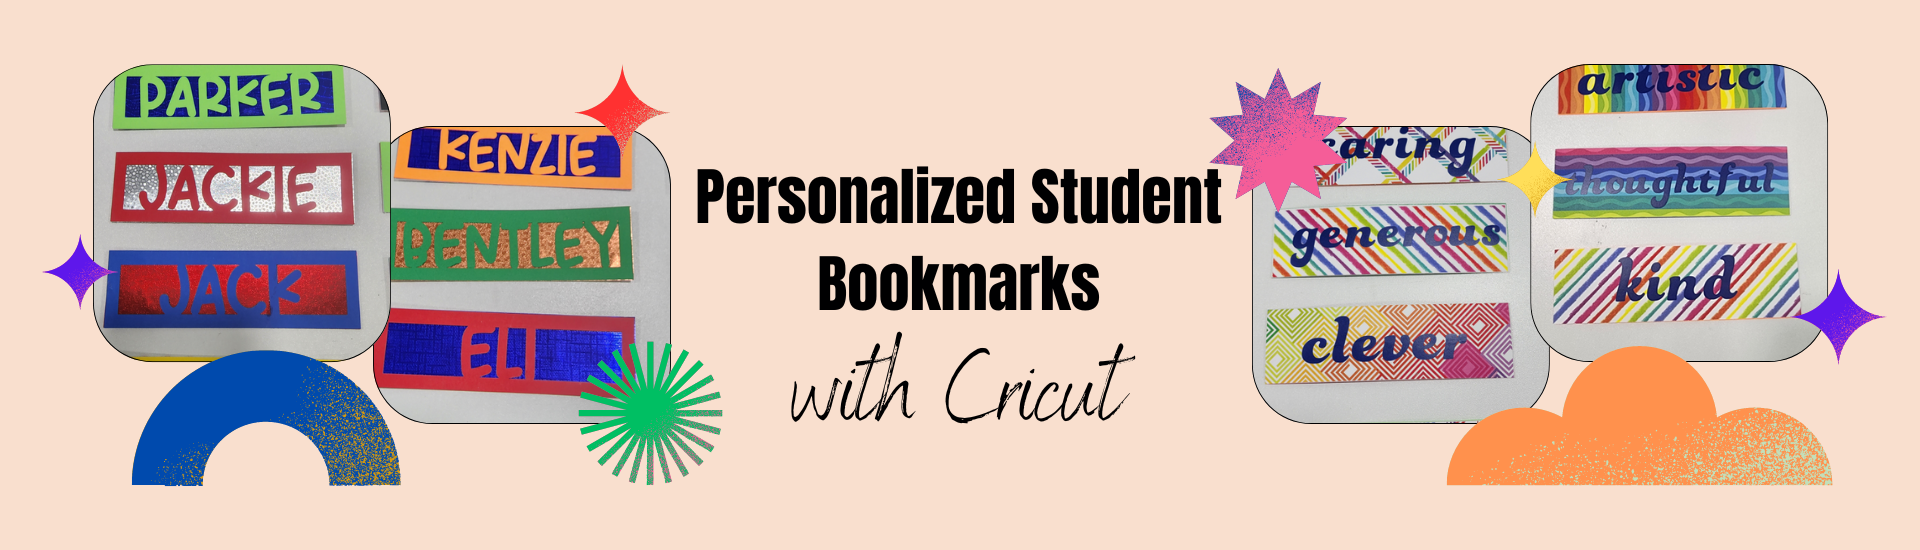 DIY Personalized Student Bookmarks with Cricut